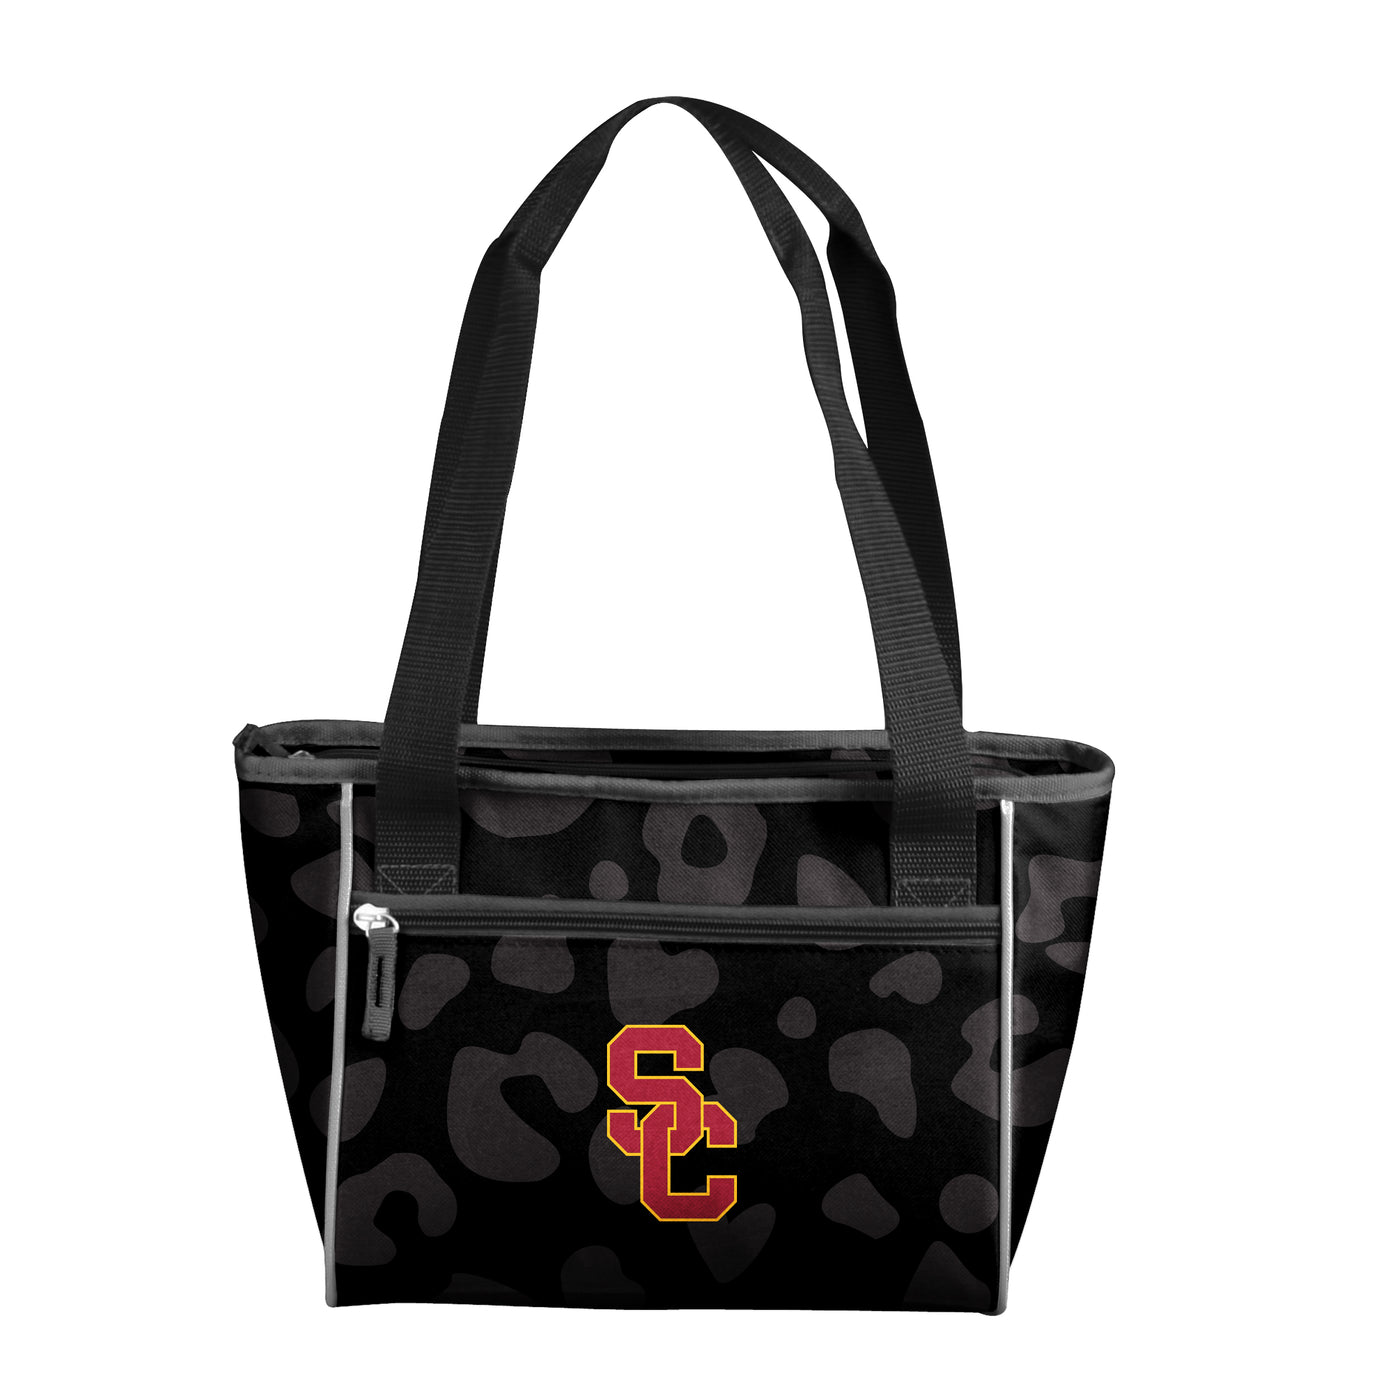 USC Leopard Print 16 Can Cooler Tote